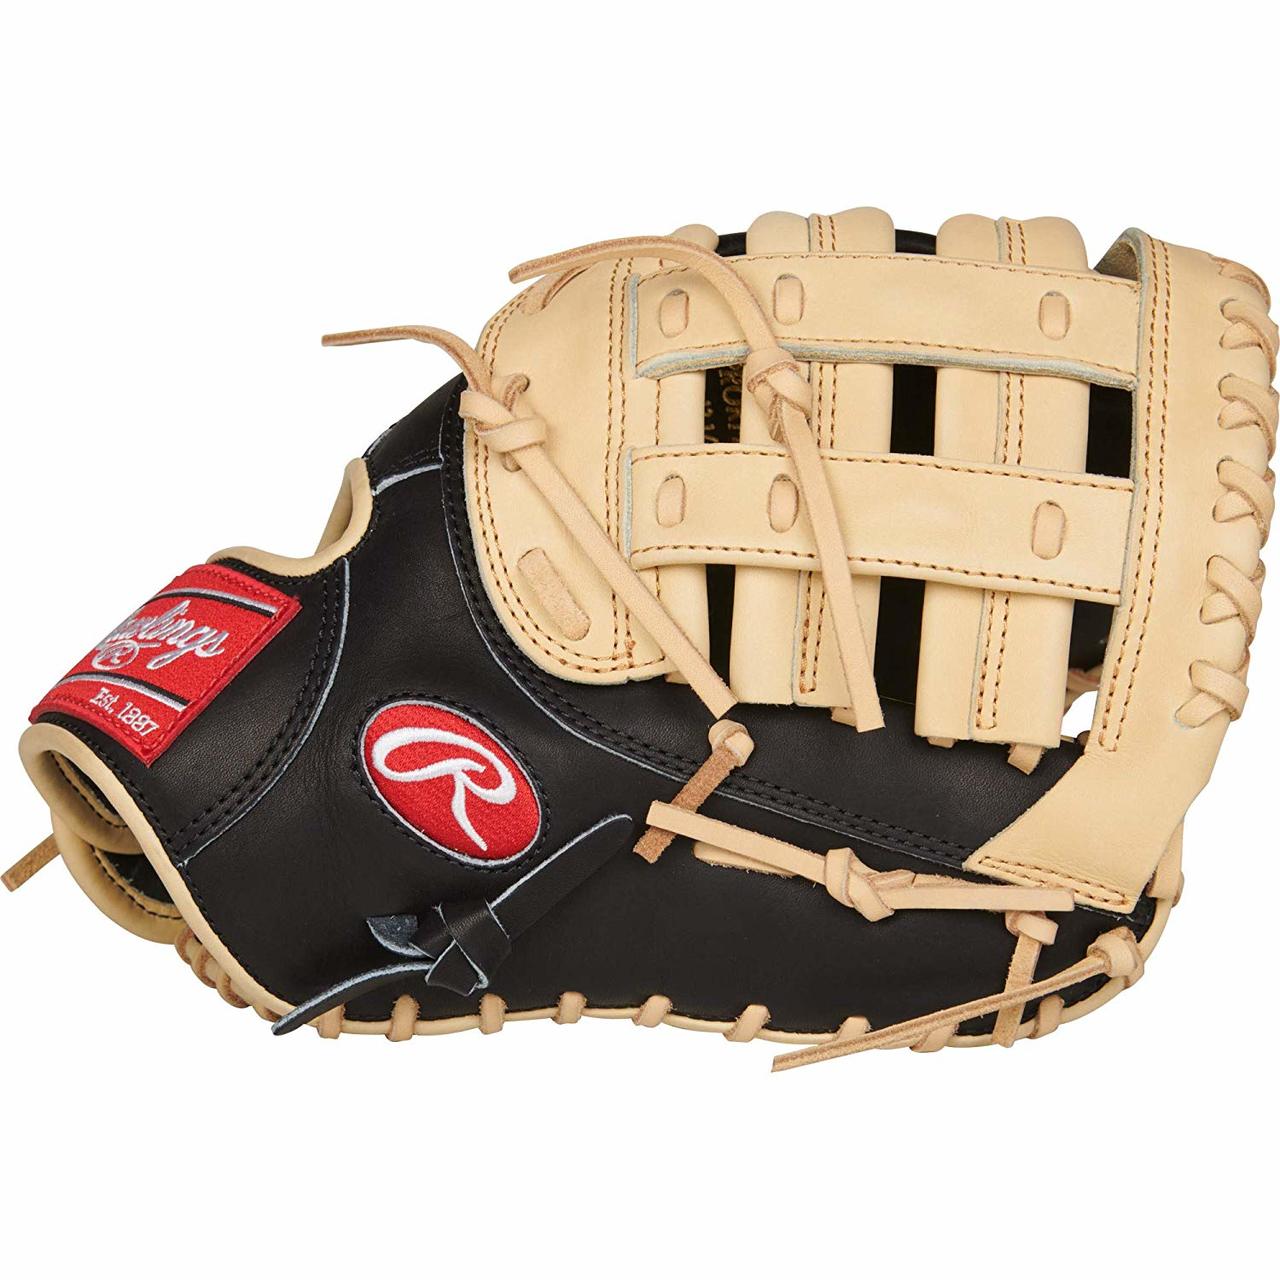 rawlings-heart-of-hide-r2g-prorfm18-17bc-first-base-mitt-12-5-right-hand-throw PRORFM18-17BC-RightHandThrow Rawlings 083321526671 Ready 2 Go with little to no break-in Required Traditional heart